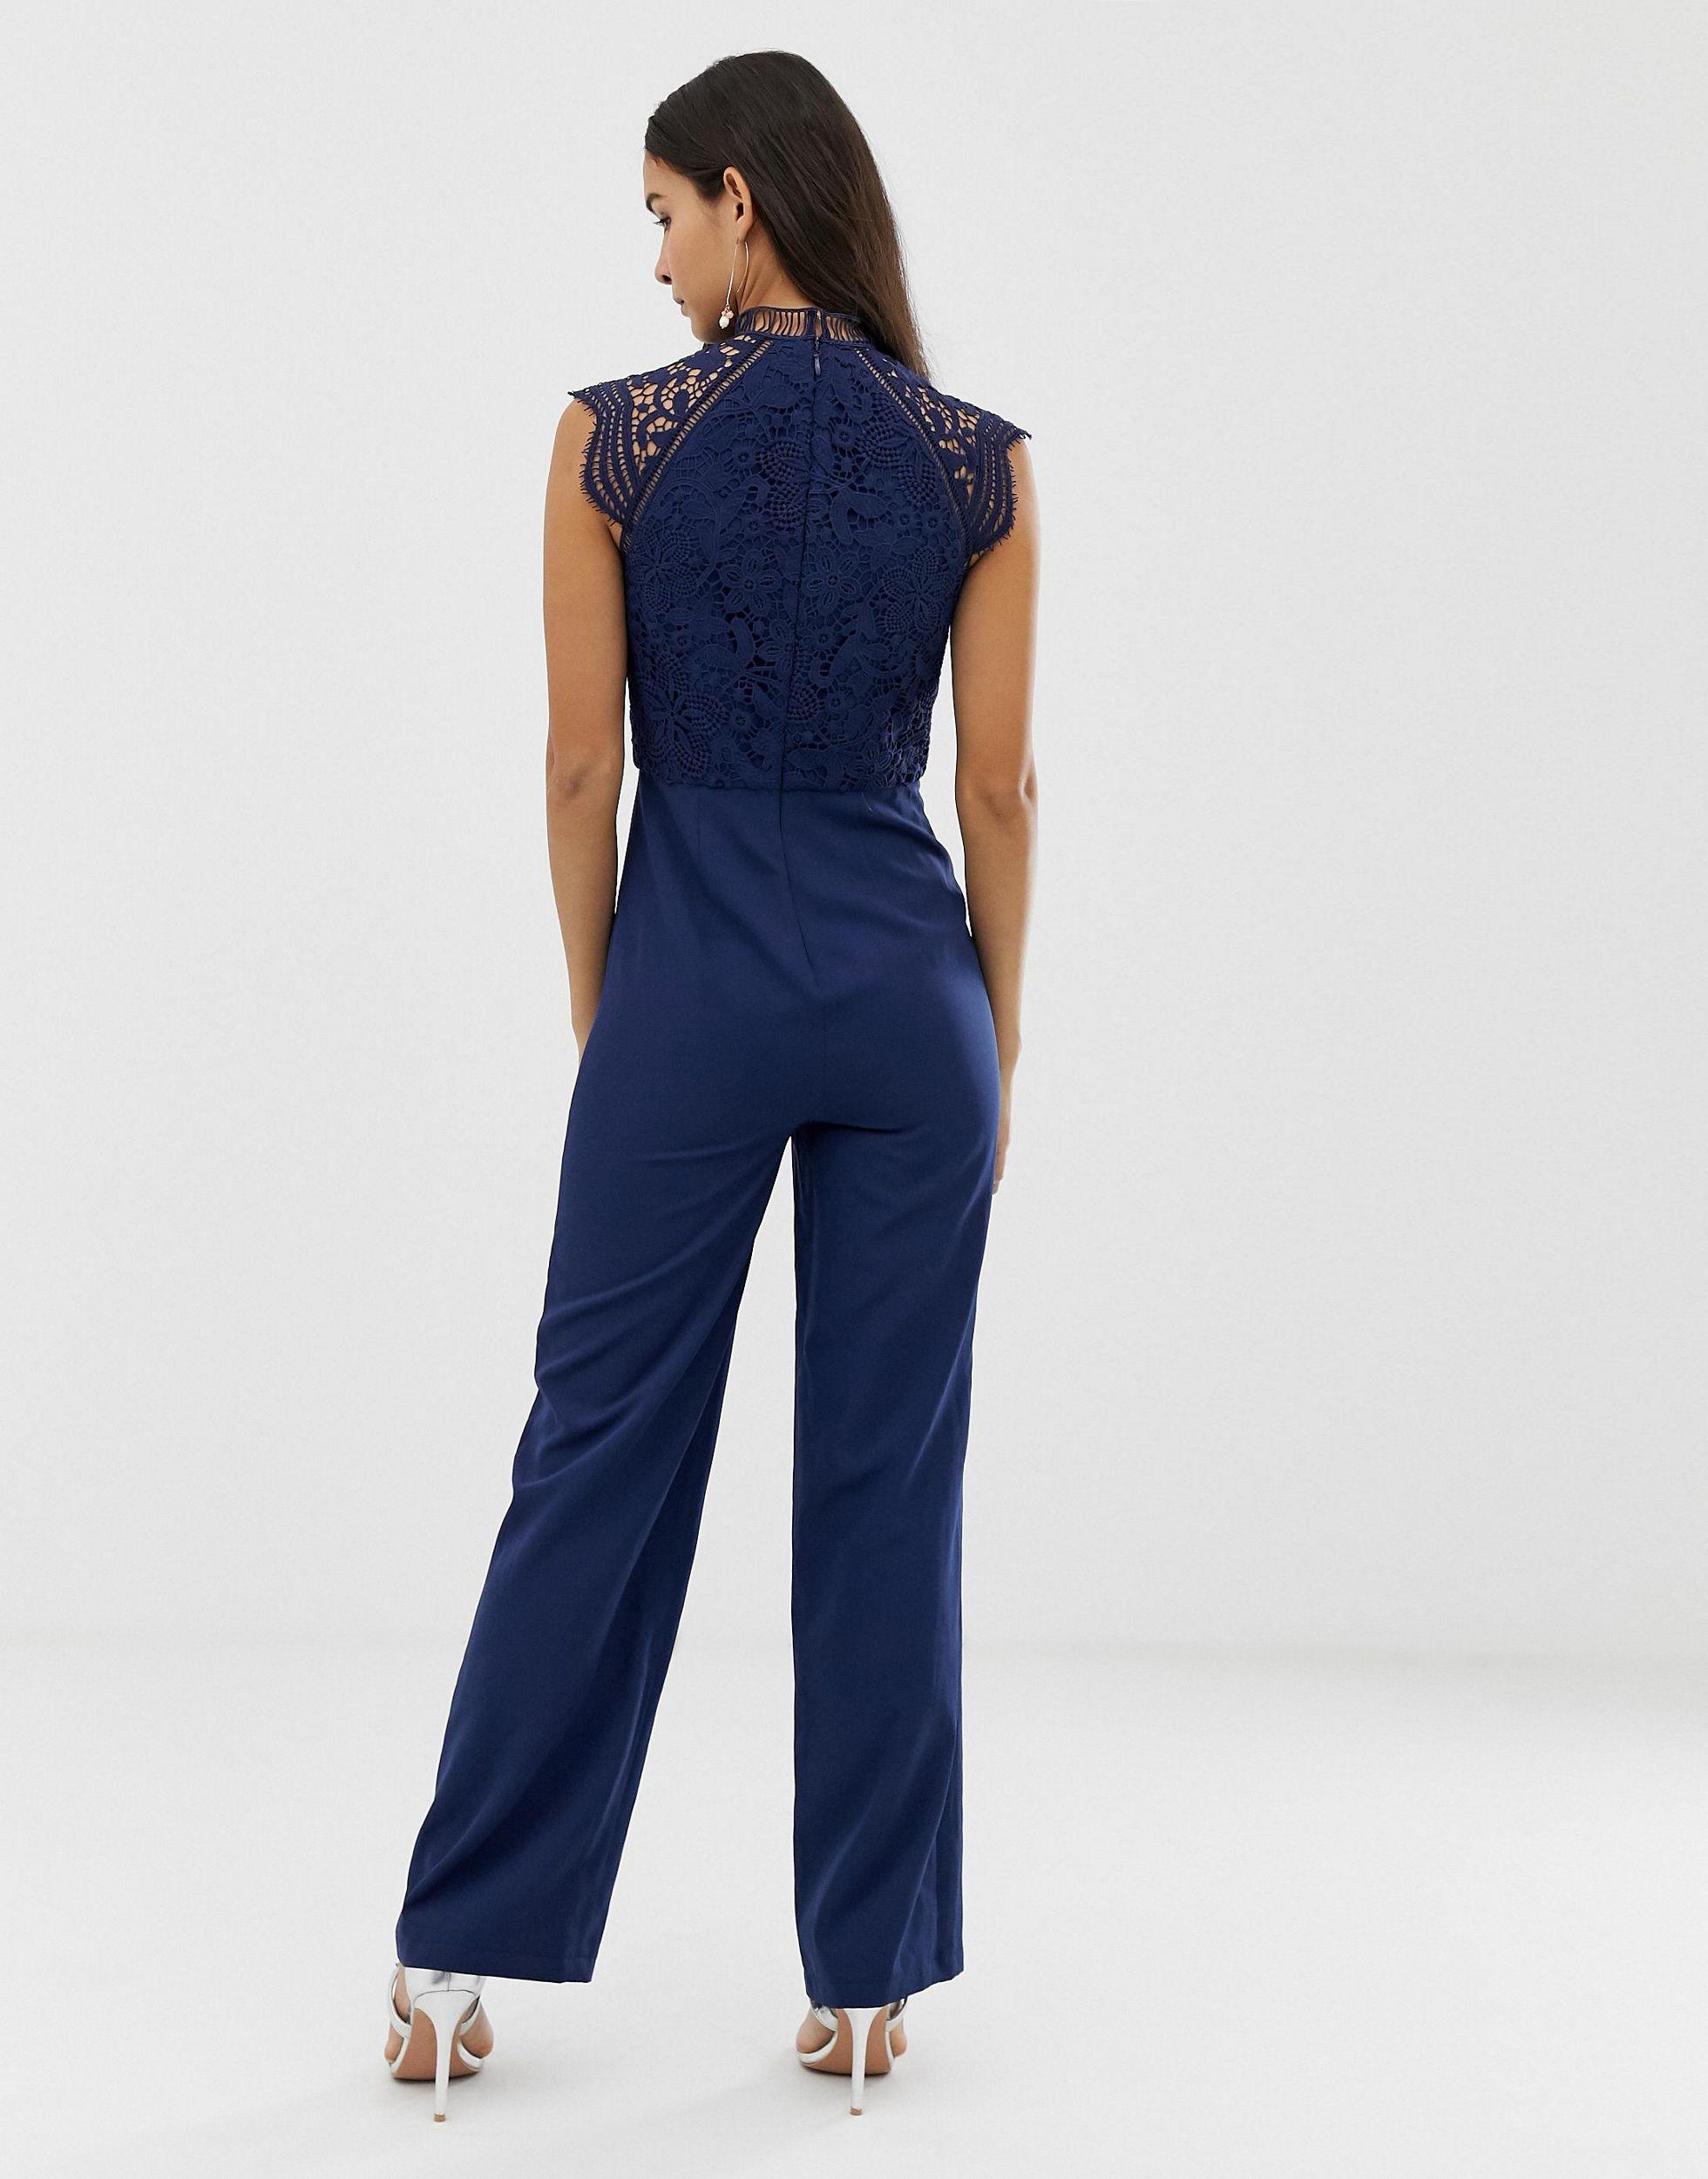 Chi Chi London 2 In 1 High Neck Lace Jumpsuit In Navy in Blue | Lyst